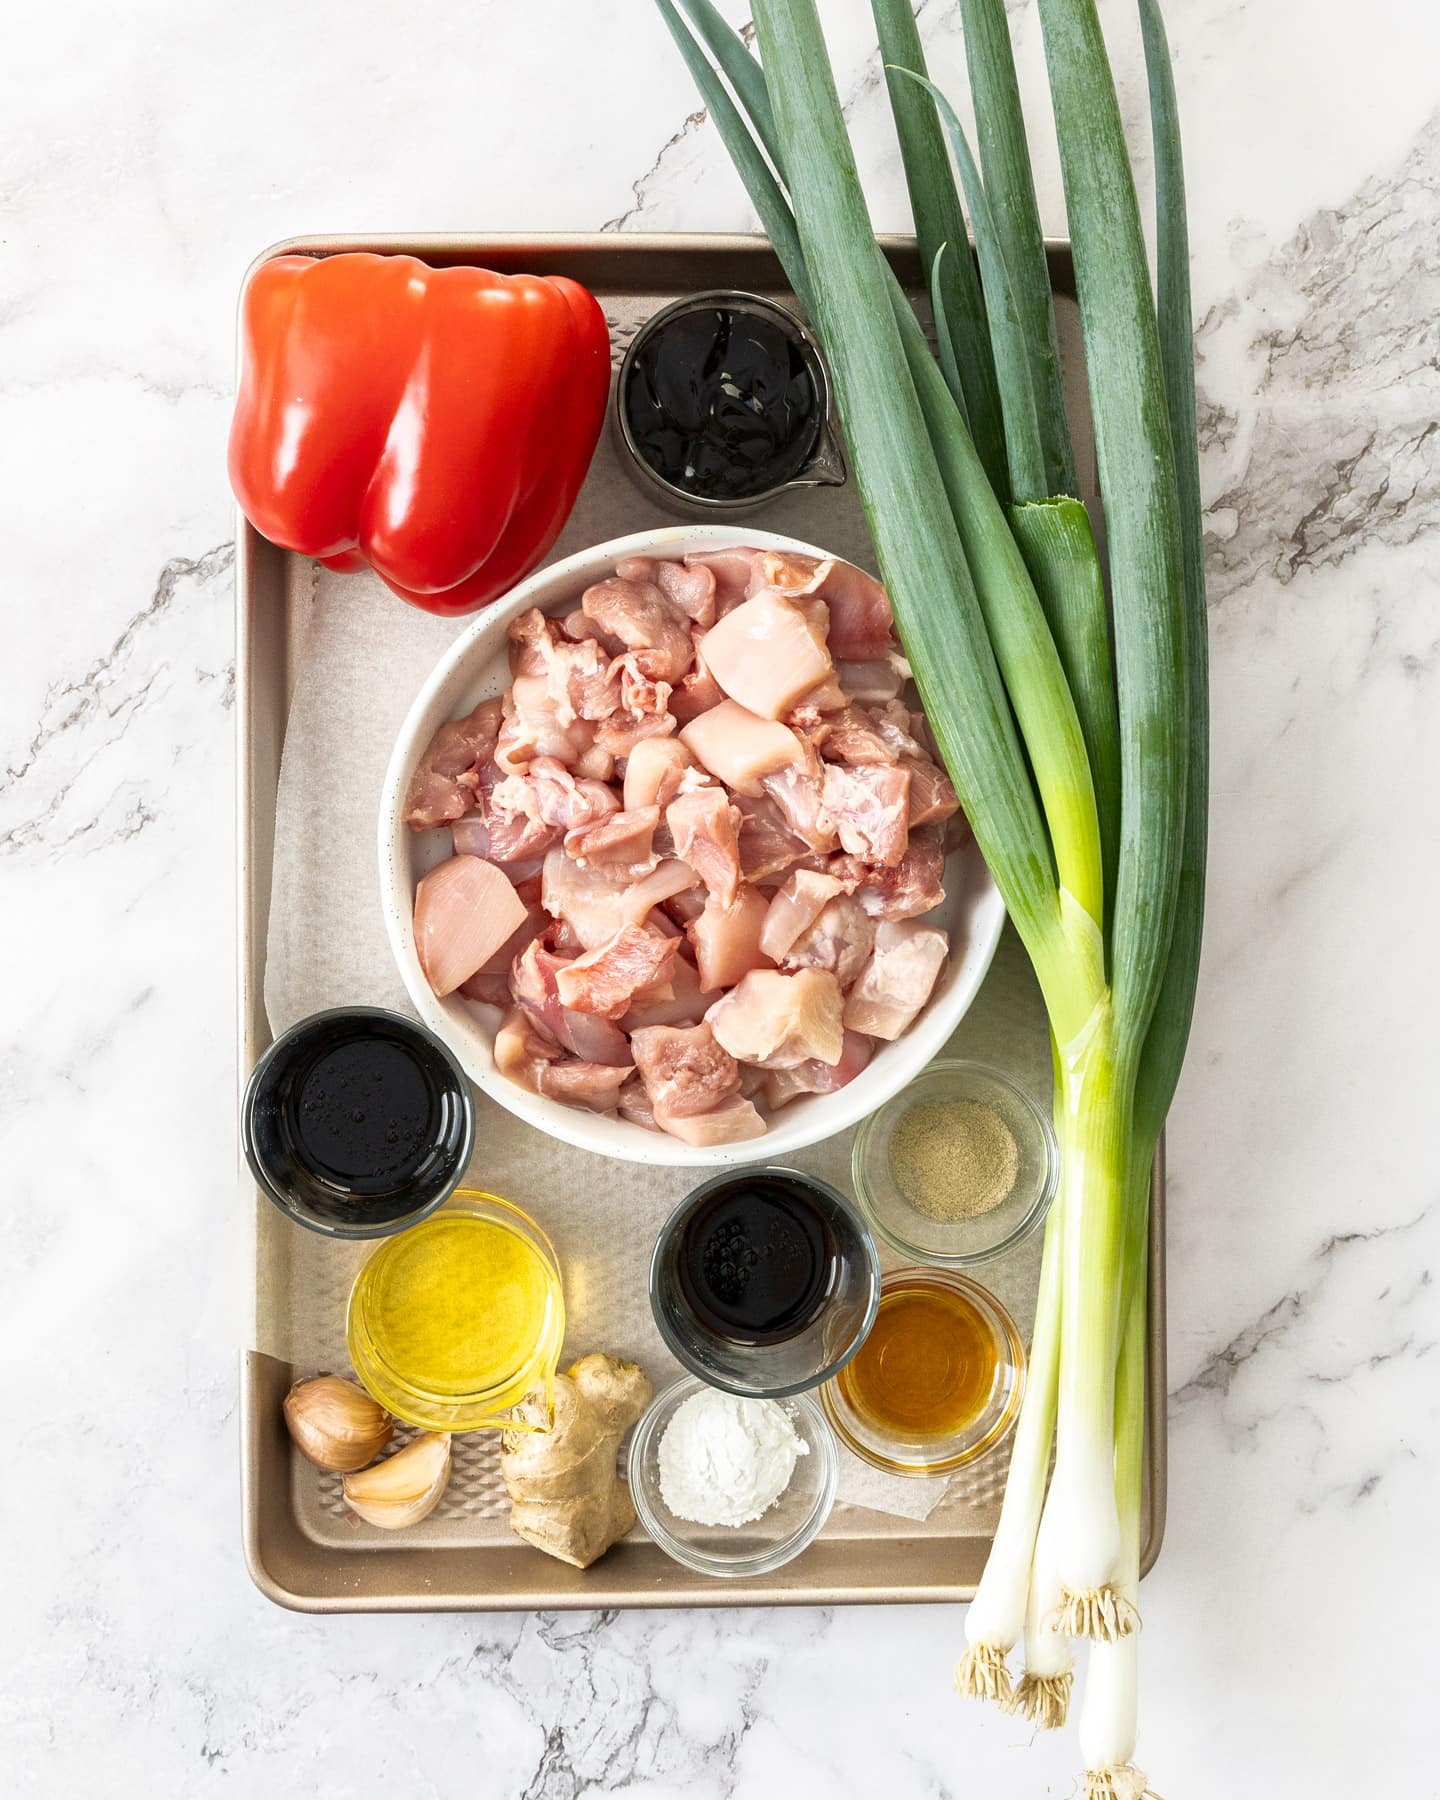 Ingredients for chicken in oyster sauce on a baking tray.